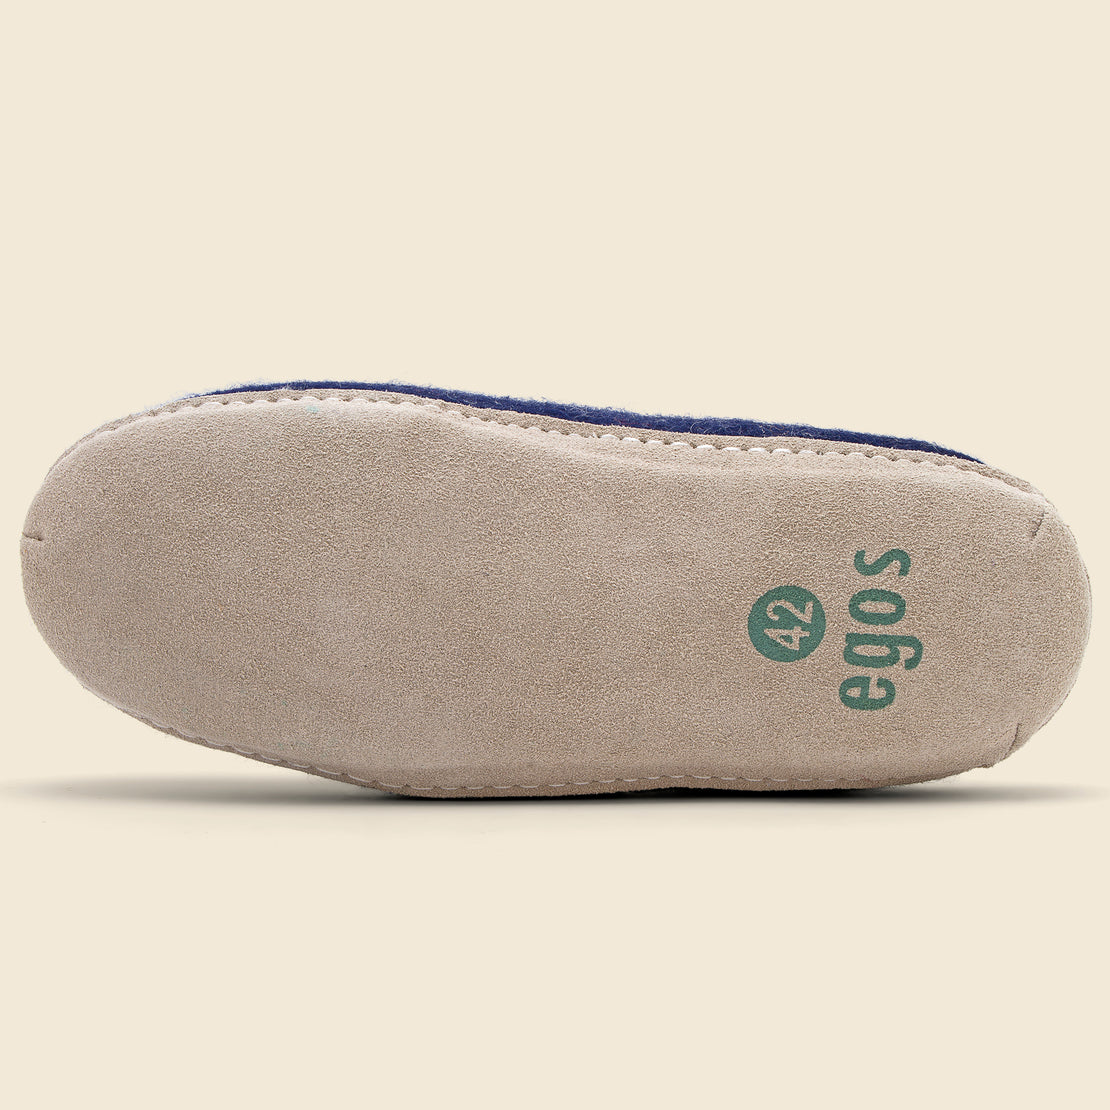 Wool Slippers - Blue - EGOS COPENHAGEN - STAG Provisions - Home - Bed - Slipper